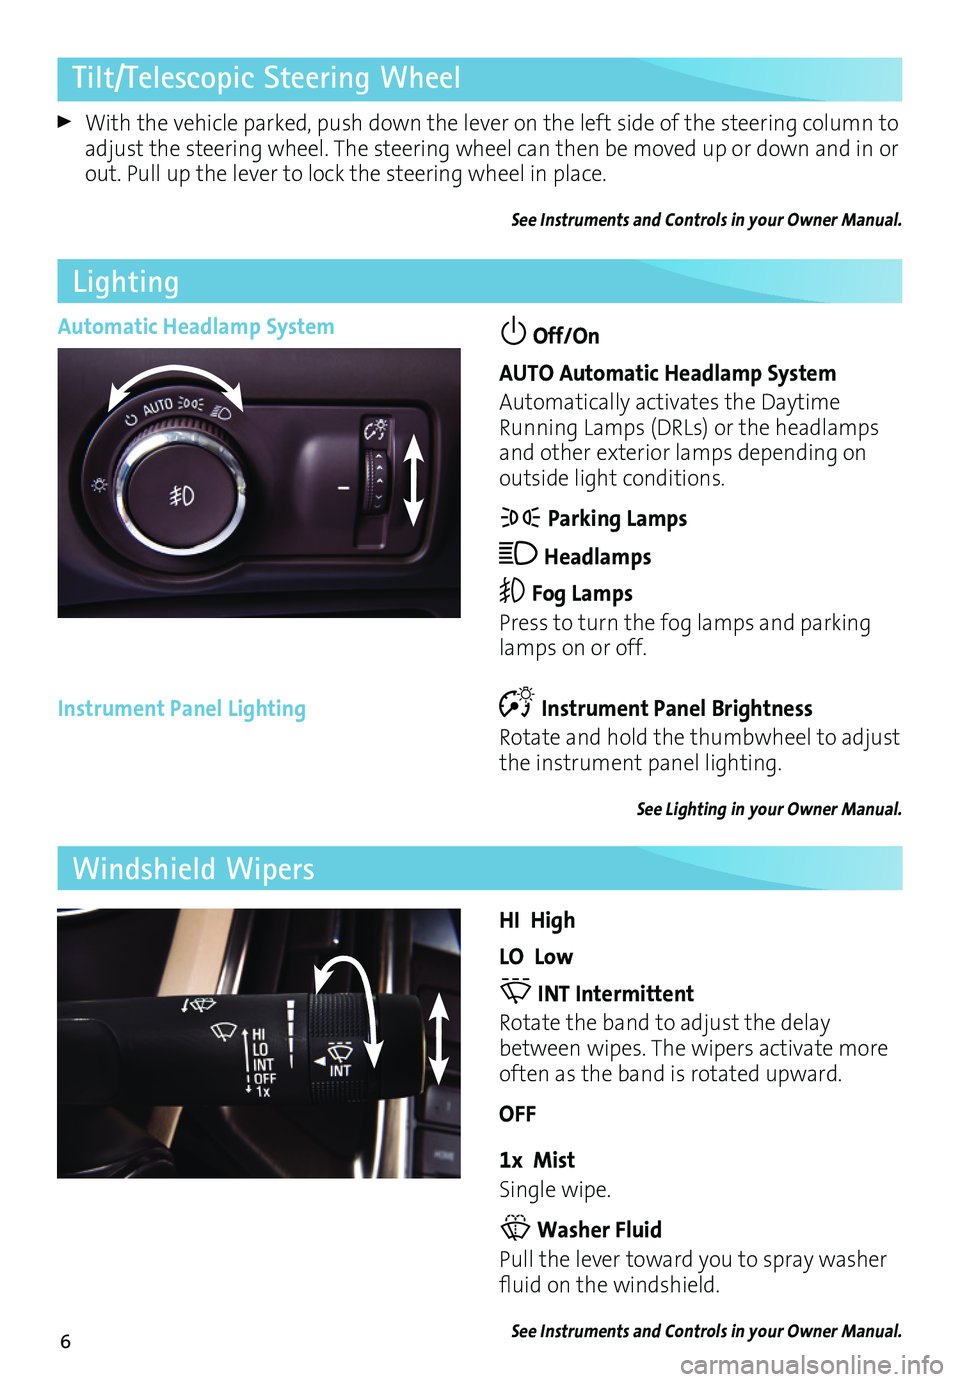 BUICK VERANO 2017  Get To Know Guide 6
Tilt/Telescopic Steering Wheel 
 With the vehicle parked, push down the lever on the left side of the steering column to adjust the steering wheel. The steering wheel can then be moved up or down an